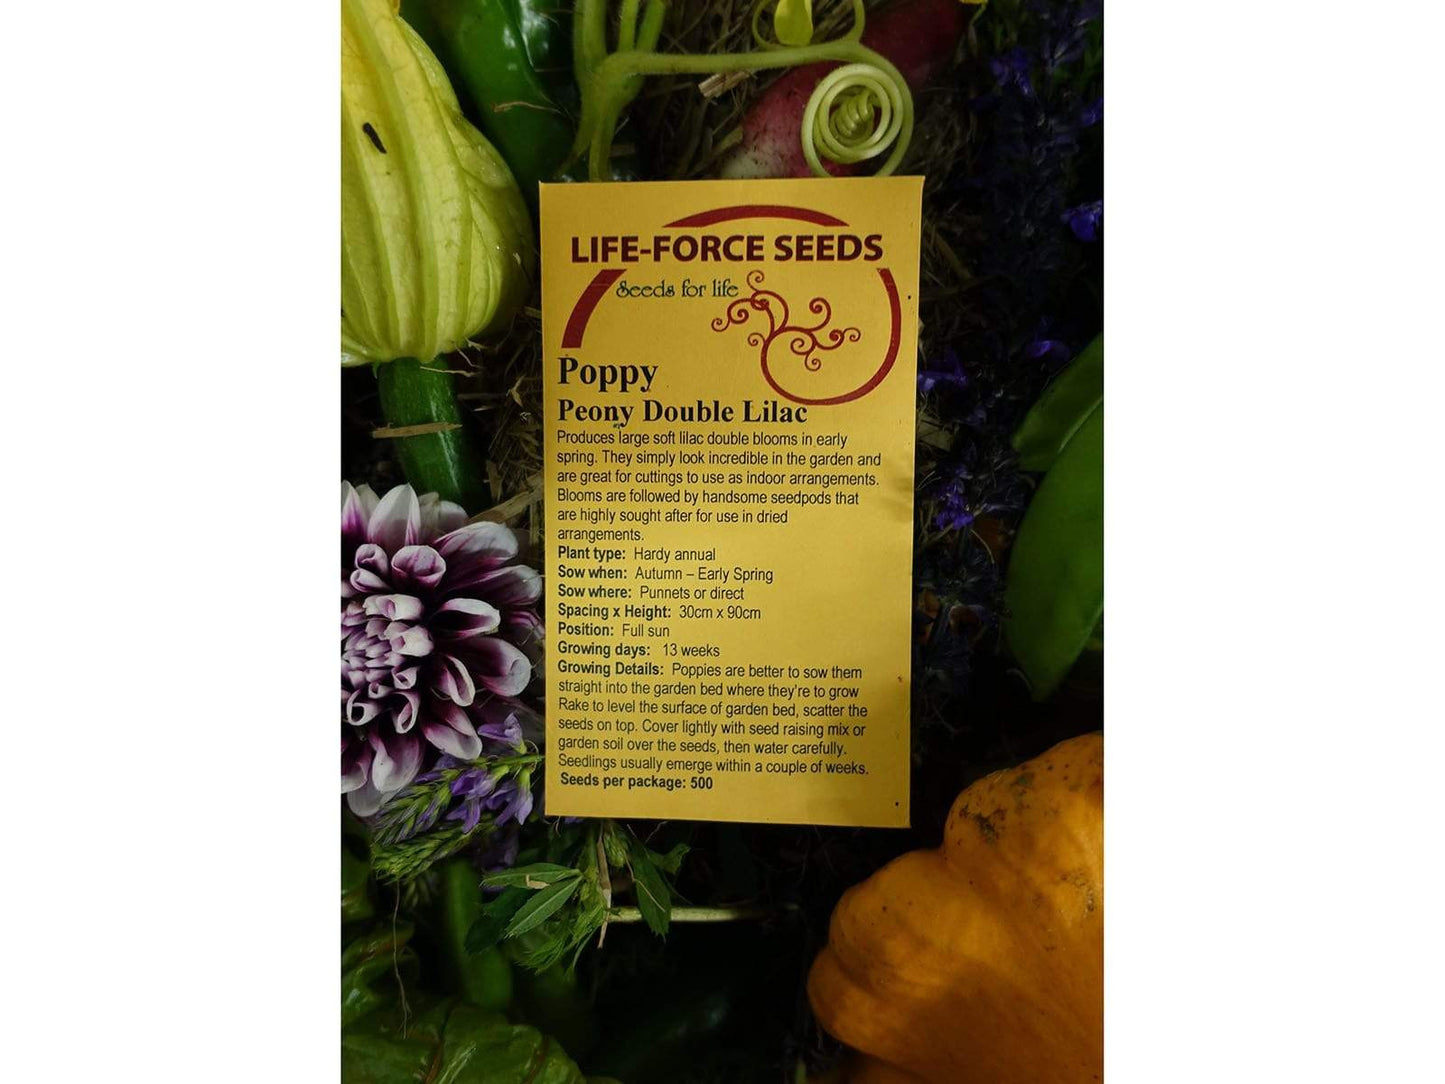 Life Force Seeds - Flowers